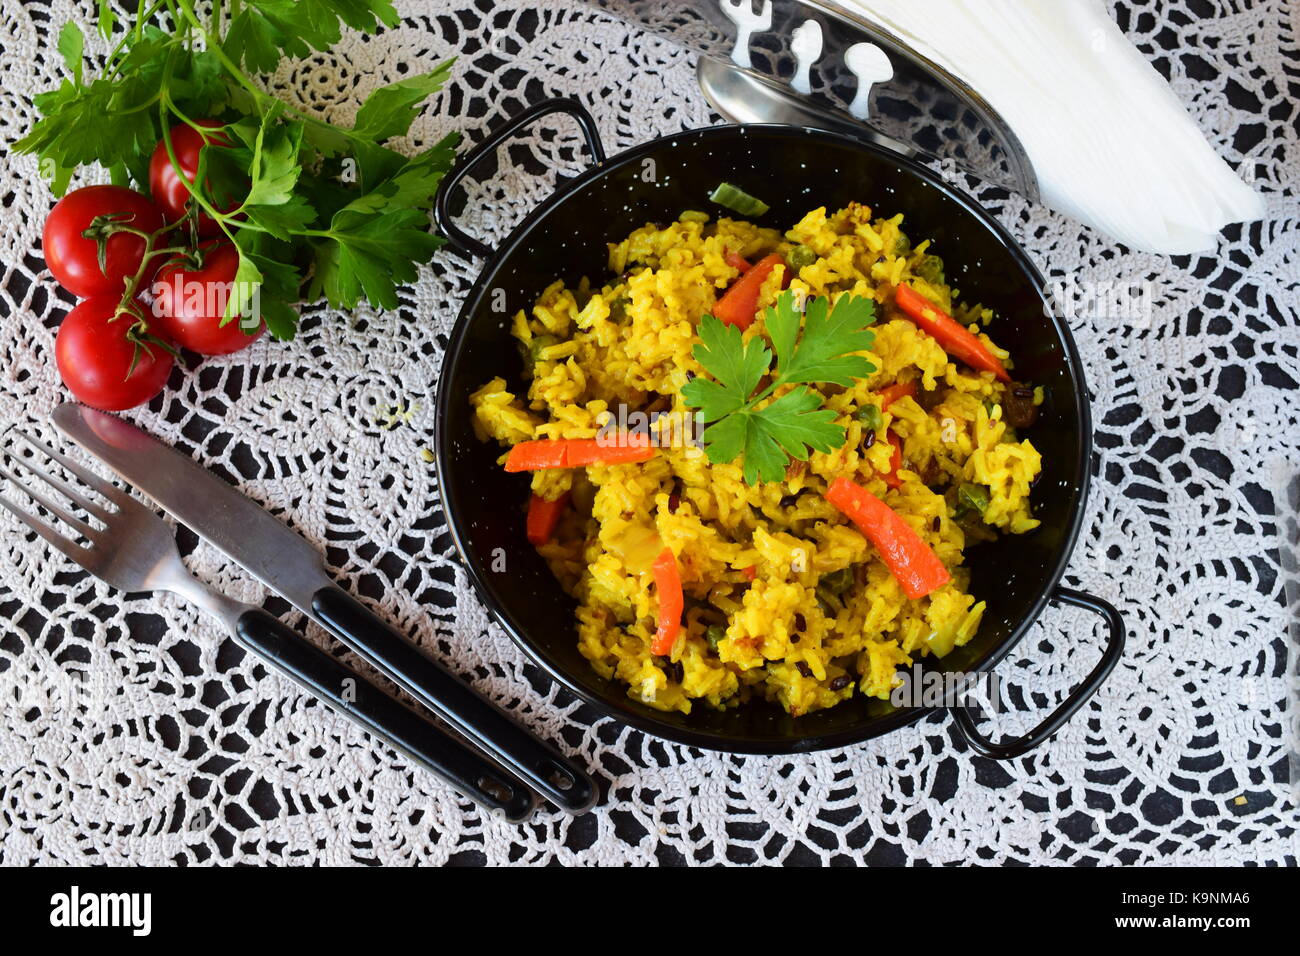 Vegetarian rice with carrots, onions, raisins and olive oil in a black metal bowl. healthy eating concept. Dieting Stock Photo